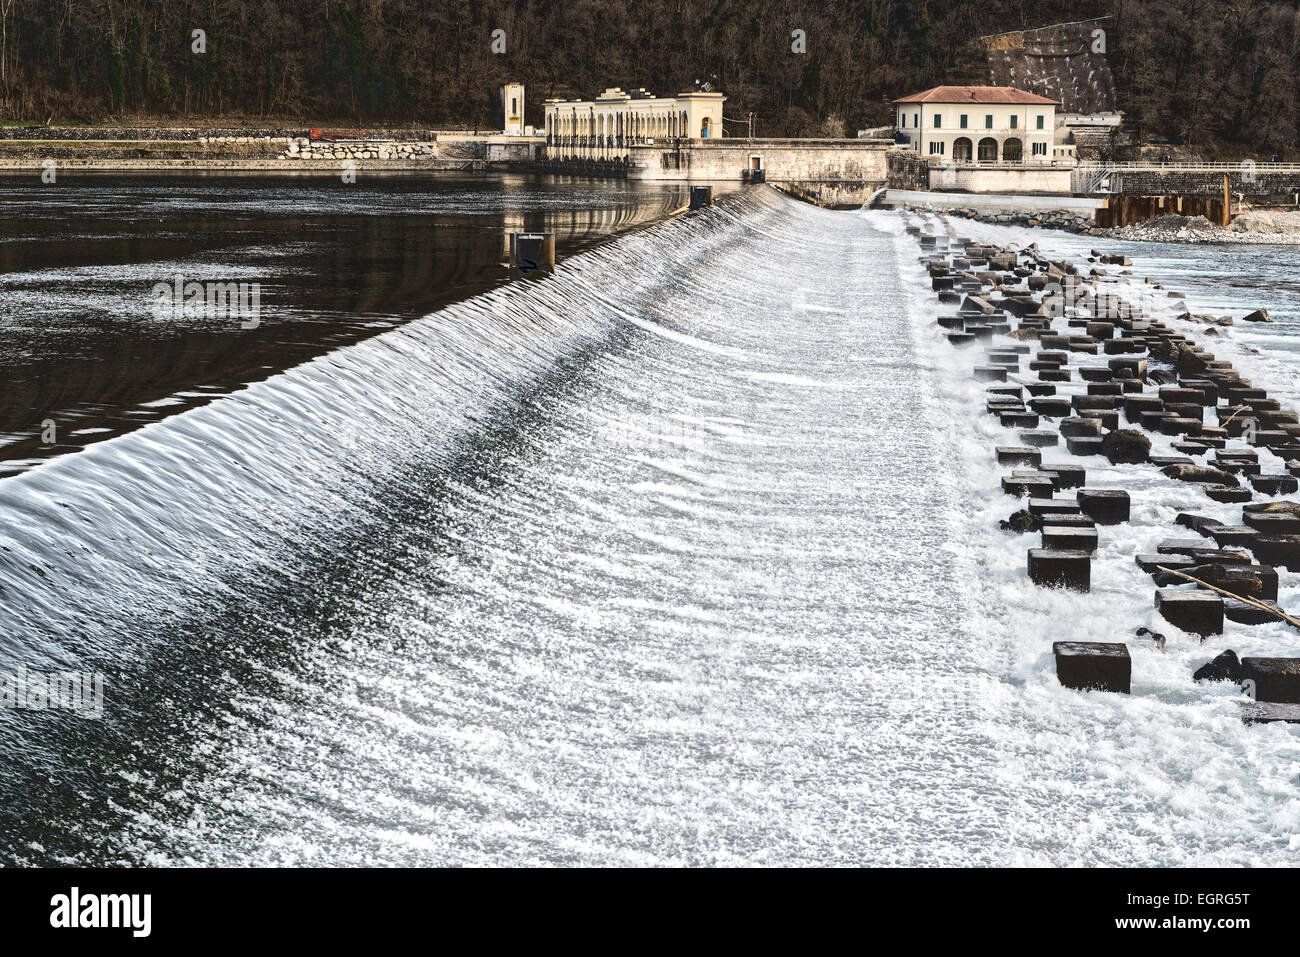 Dam of Panperduto on the Ticino River, Lombardy - Italy Stock Photo